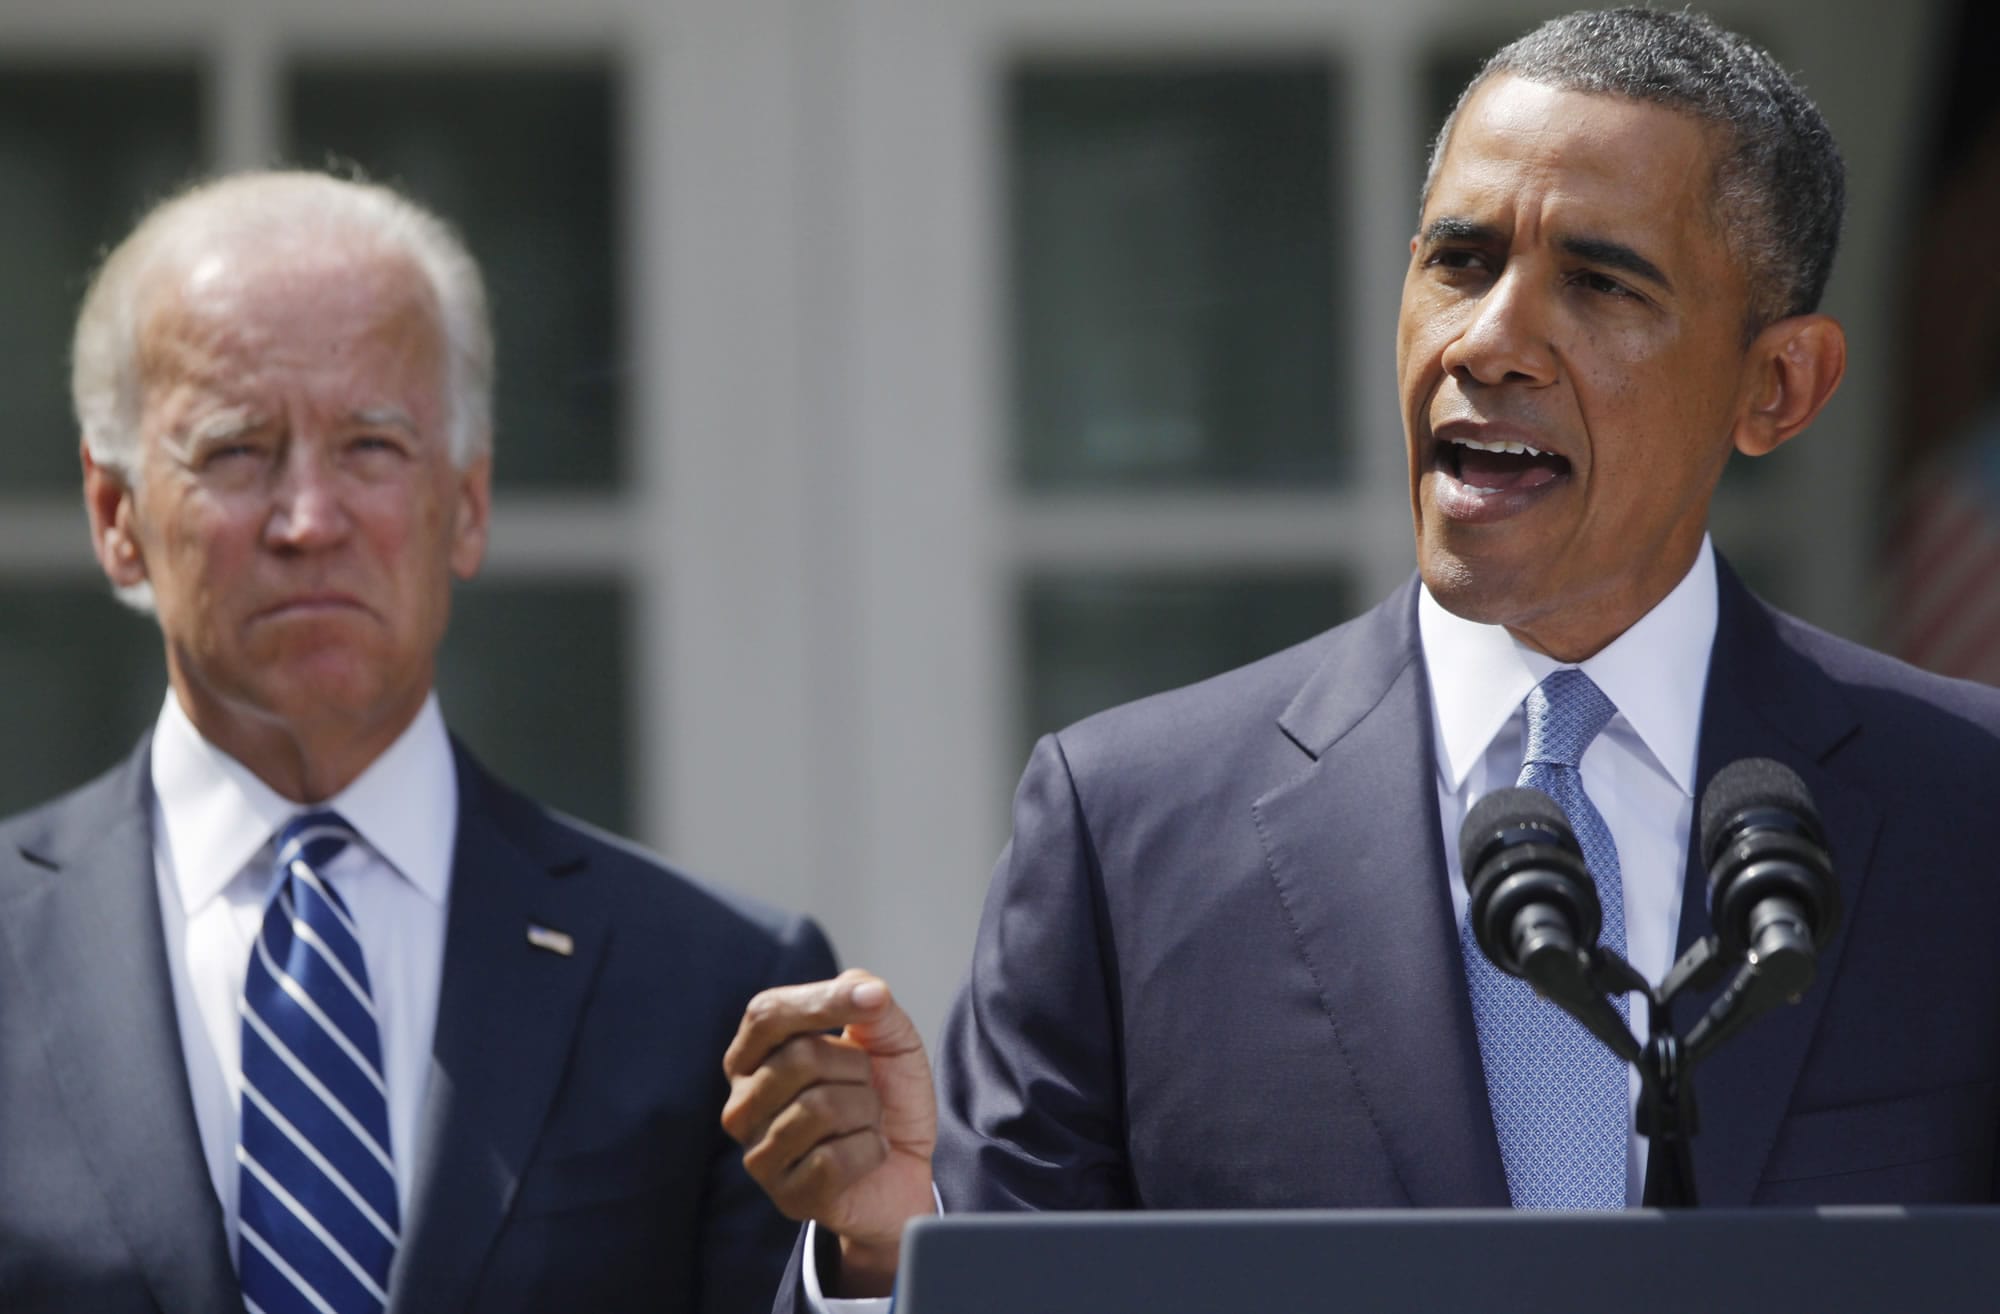 President Barack Obama stands with Vice President Joe Biden, left, as he makes a statement about Syria in the Rose Garden of the White House in Washington on Saturday. Obama says he has decided that the United States should take military action against Syria in response to a deadly chemical weapons attack.